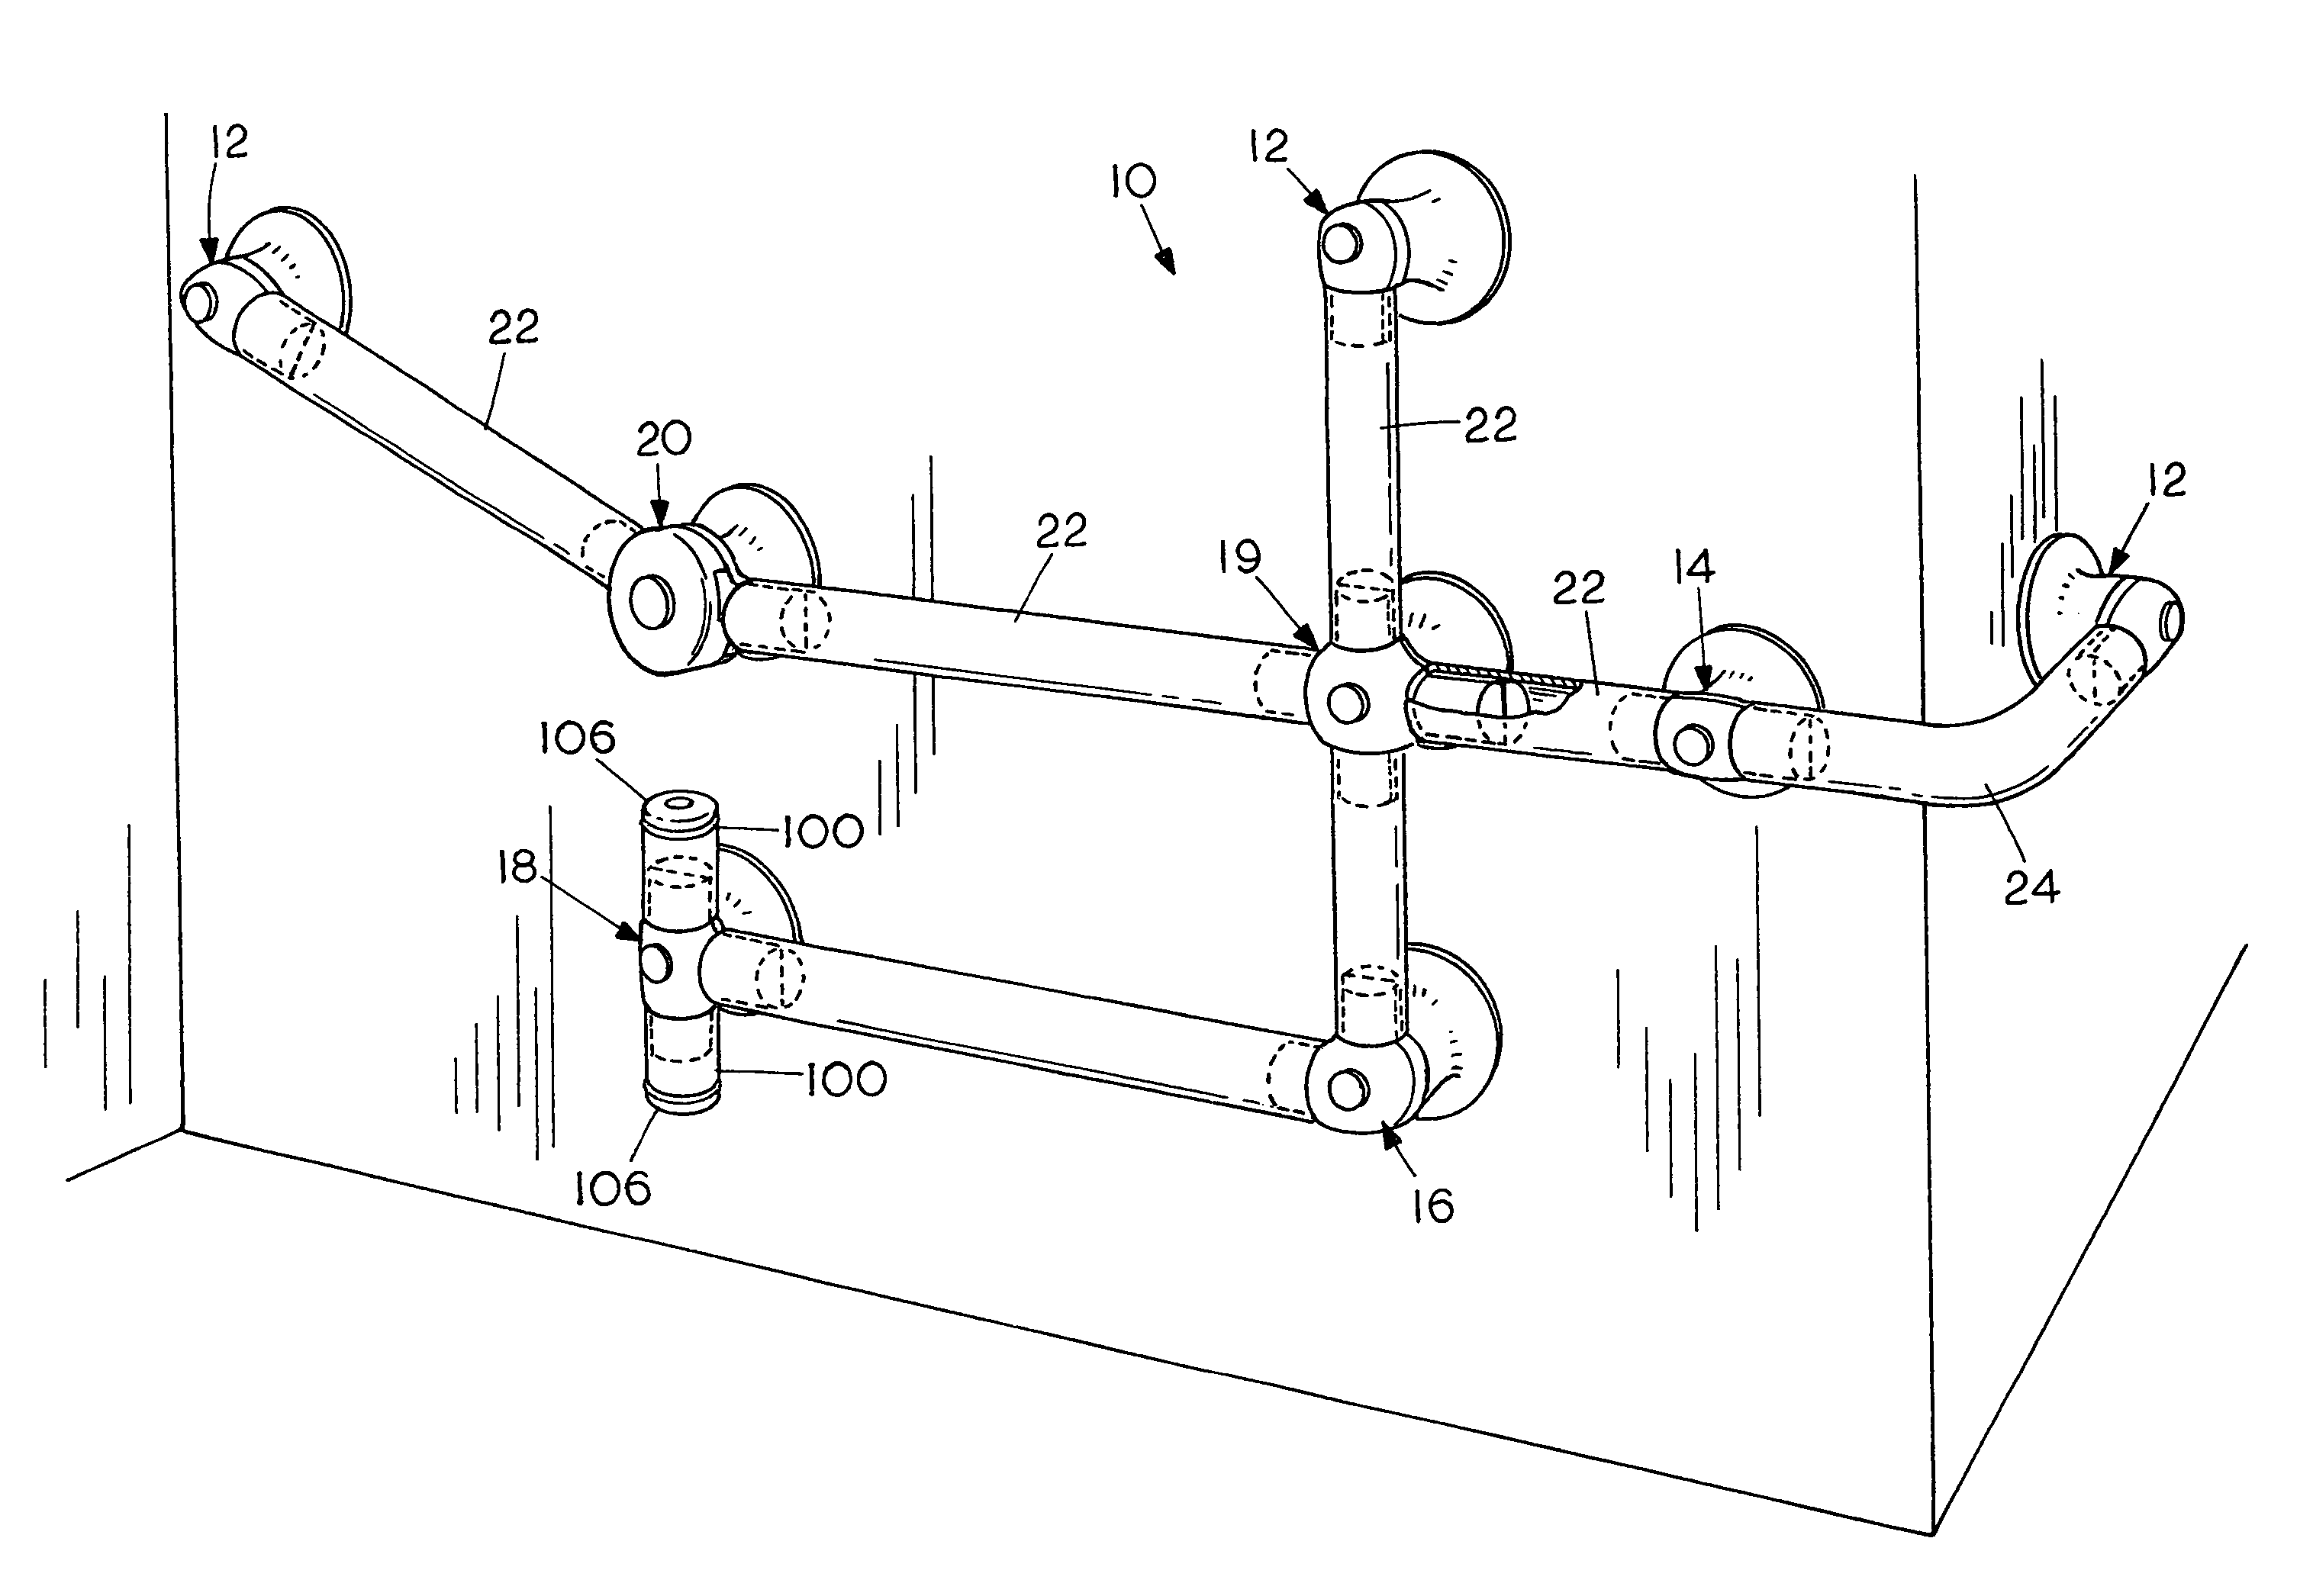 Reinforced railing support connector and grab railing